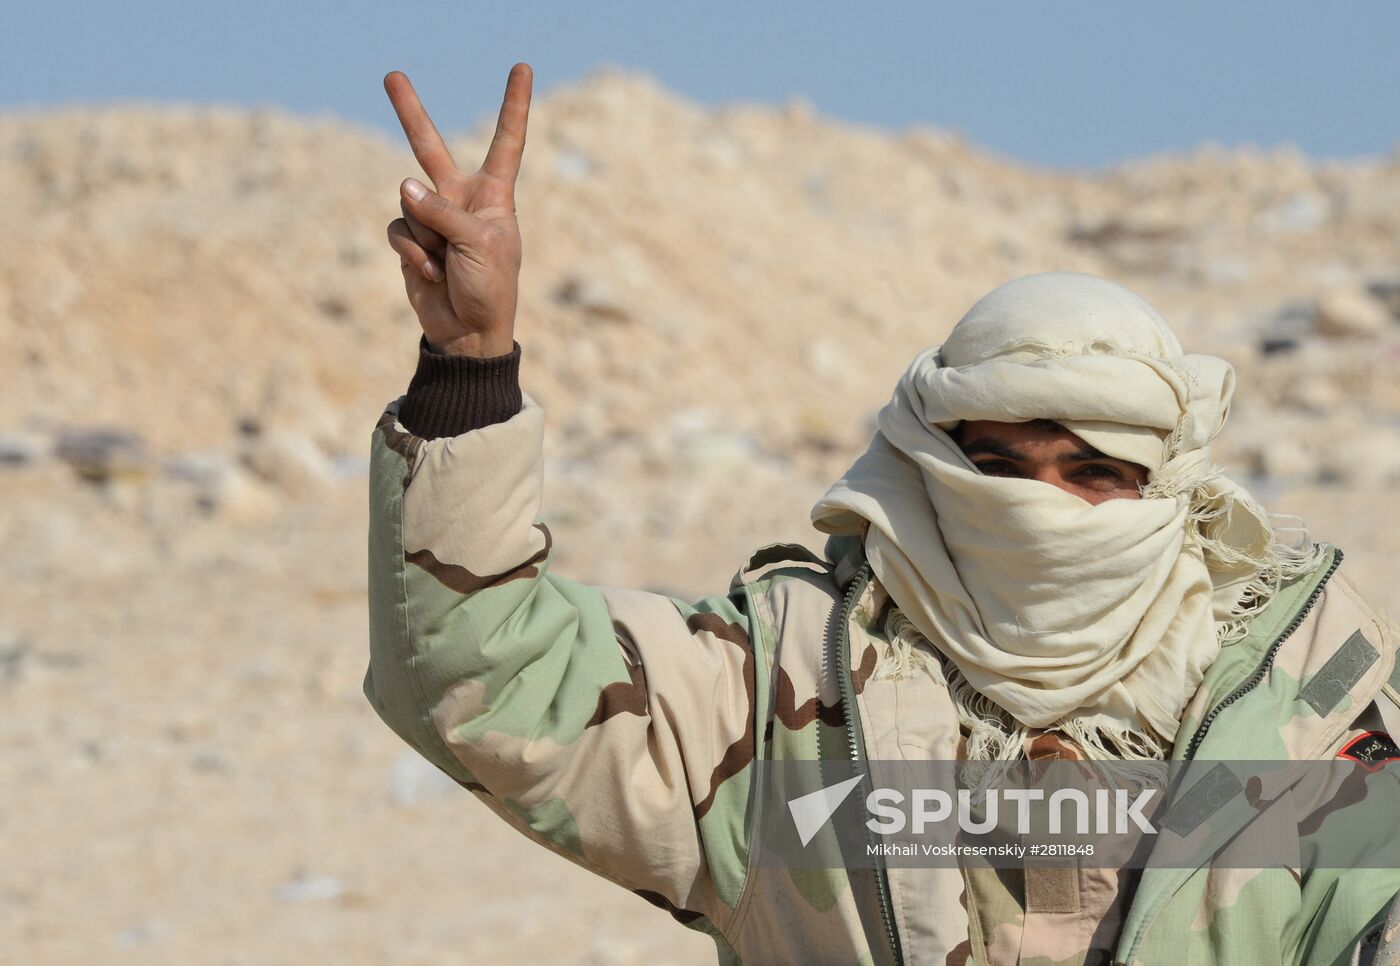 Syrian army and self-defense forces approach Palmyra